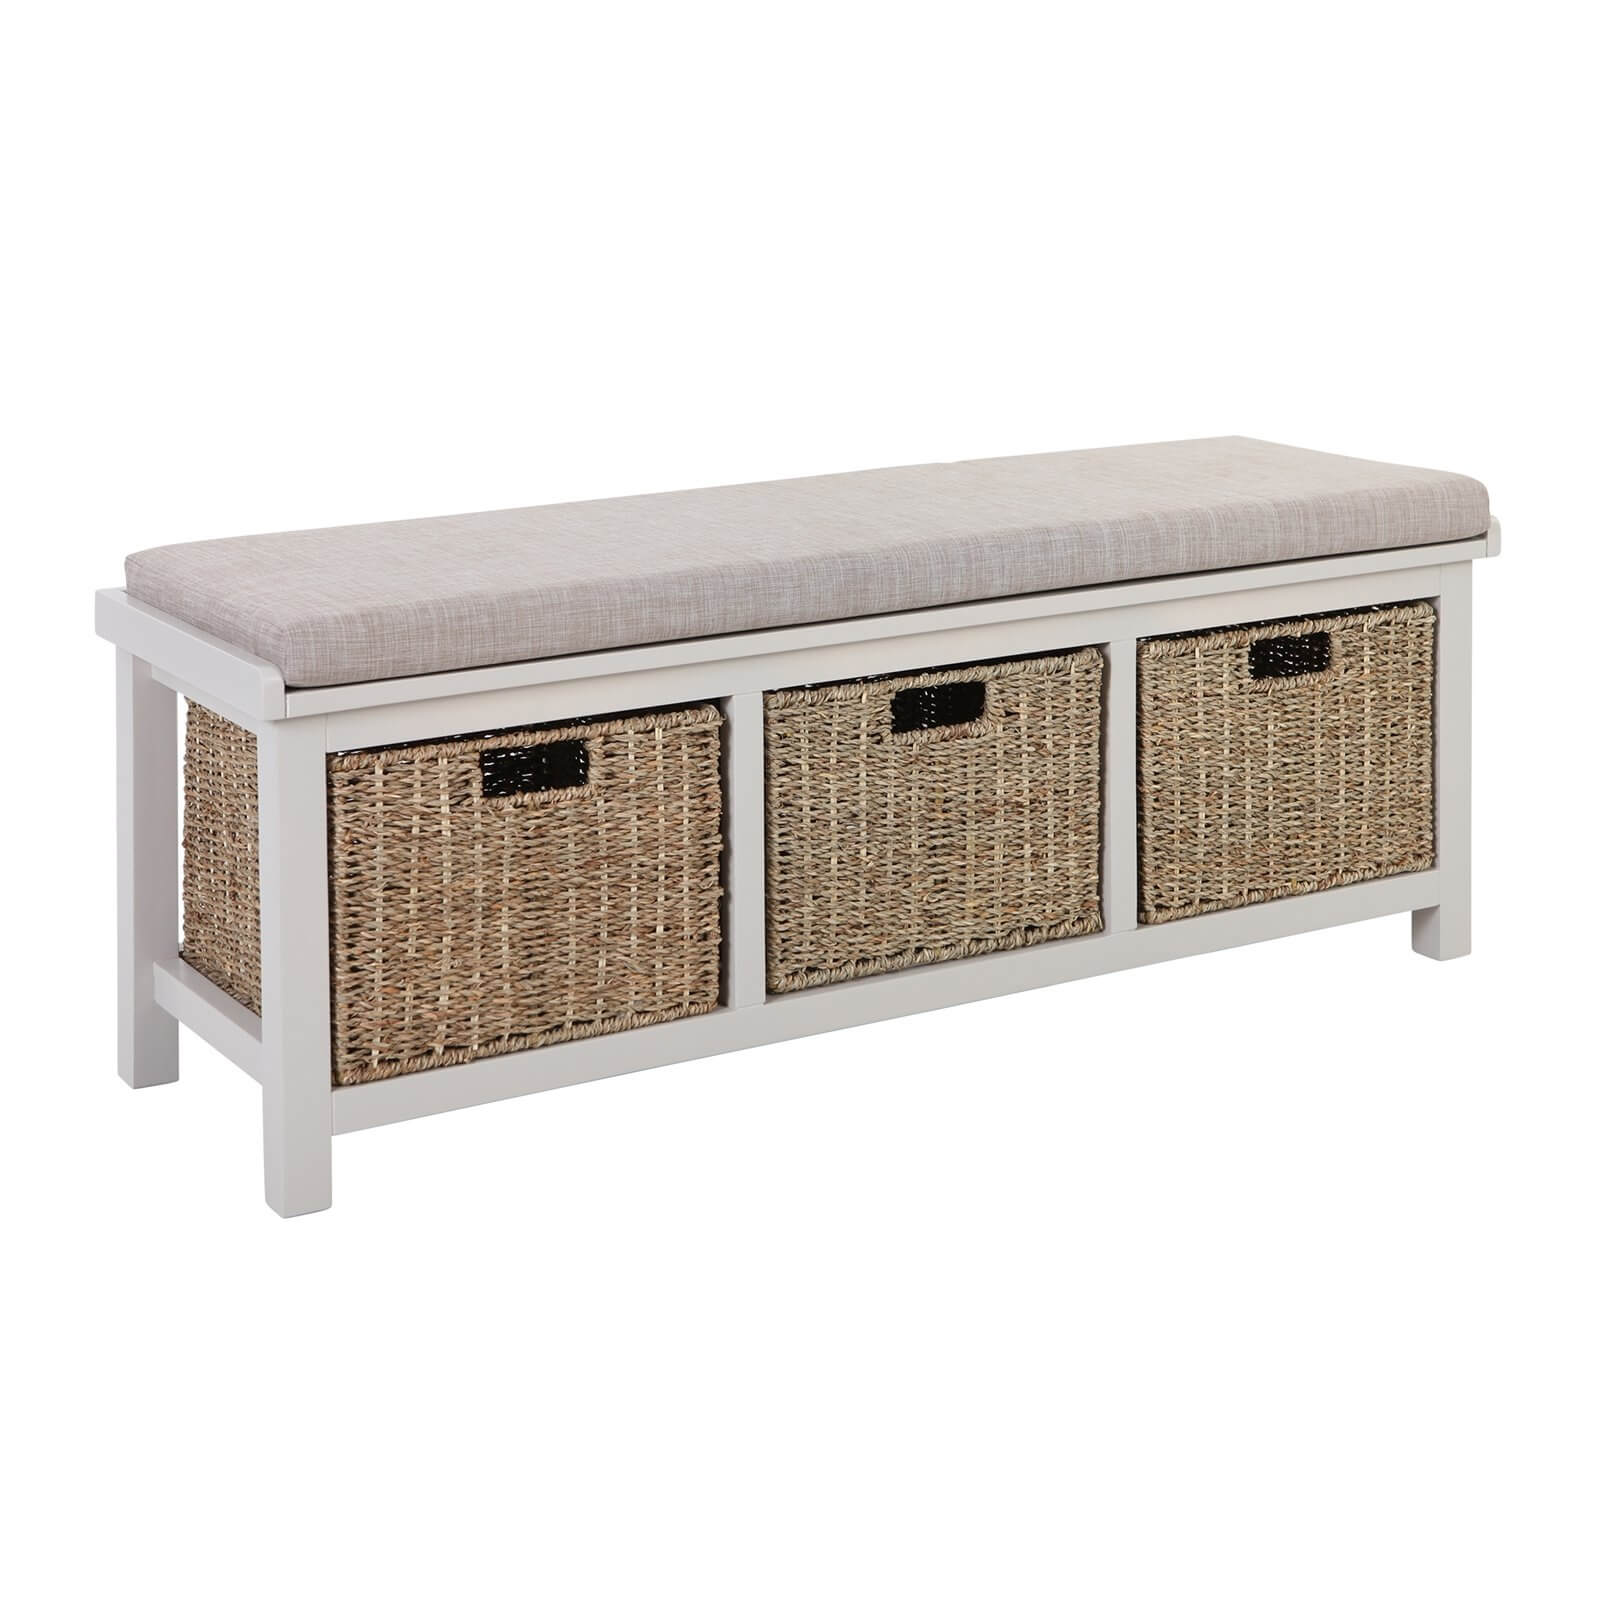 Atterley Storage Bench with Cushion